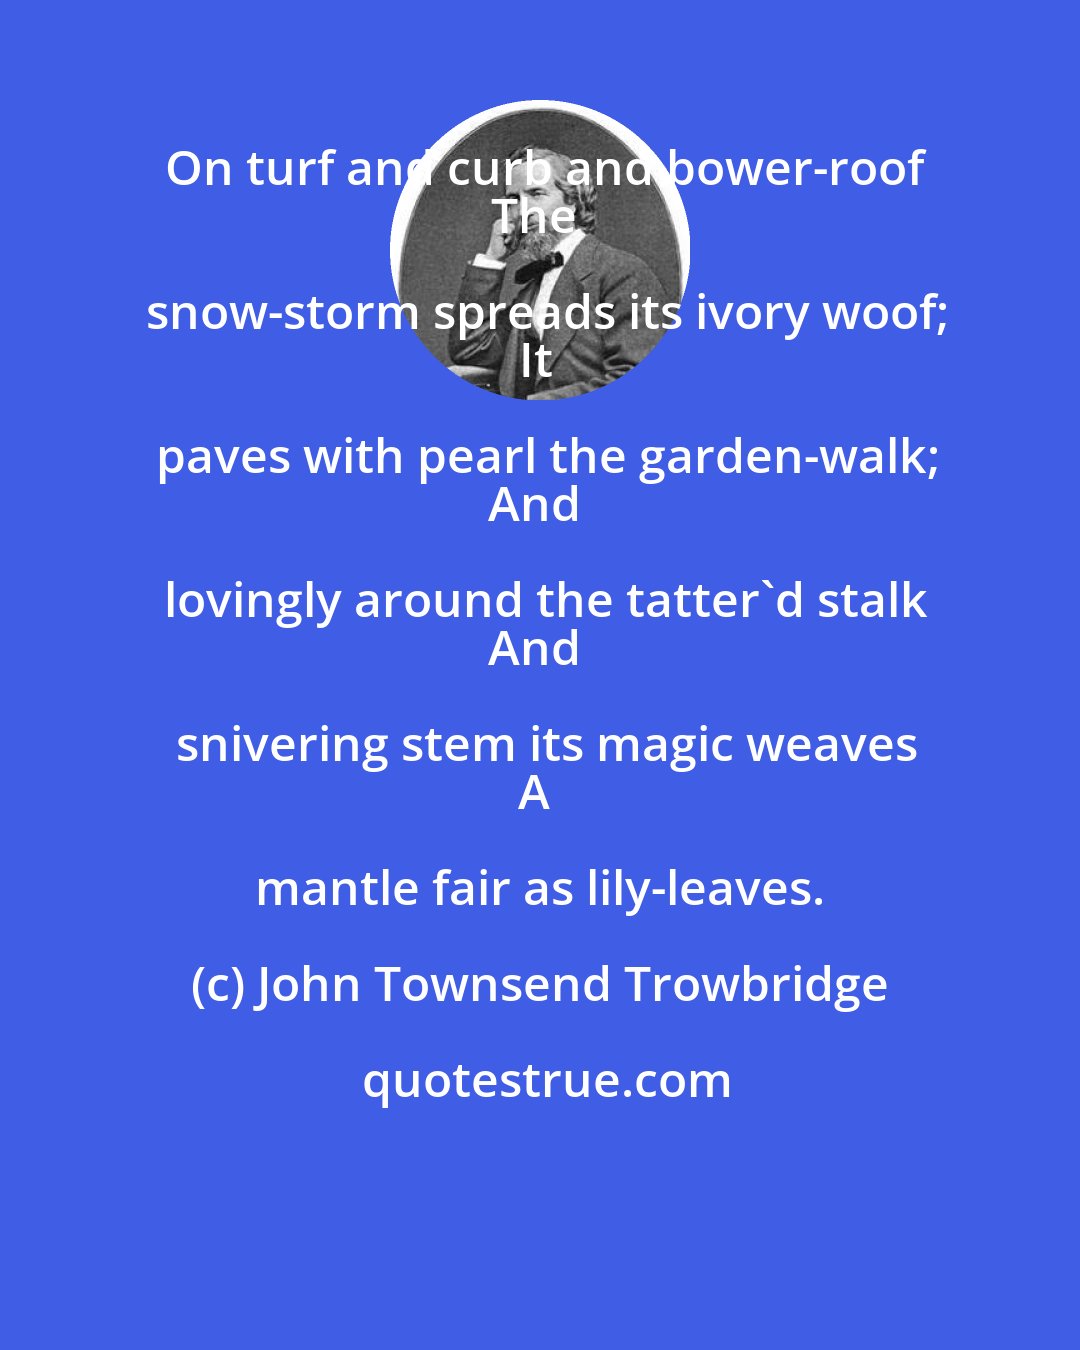 John Townsend Trowbridge: On turf and curb and bower-roof
The snow-storm spreads its ivory woof;
It paves with pearl the garden-walk;
And lovingly around the tatter'd stalk
And snivering stem its magic weaves
A mantle fair as lily-leaves.